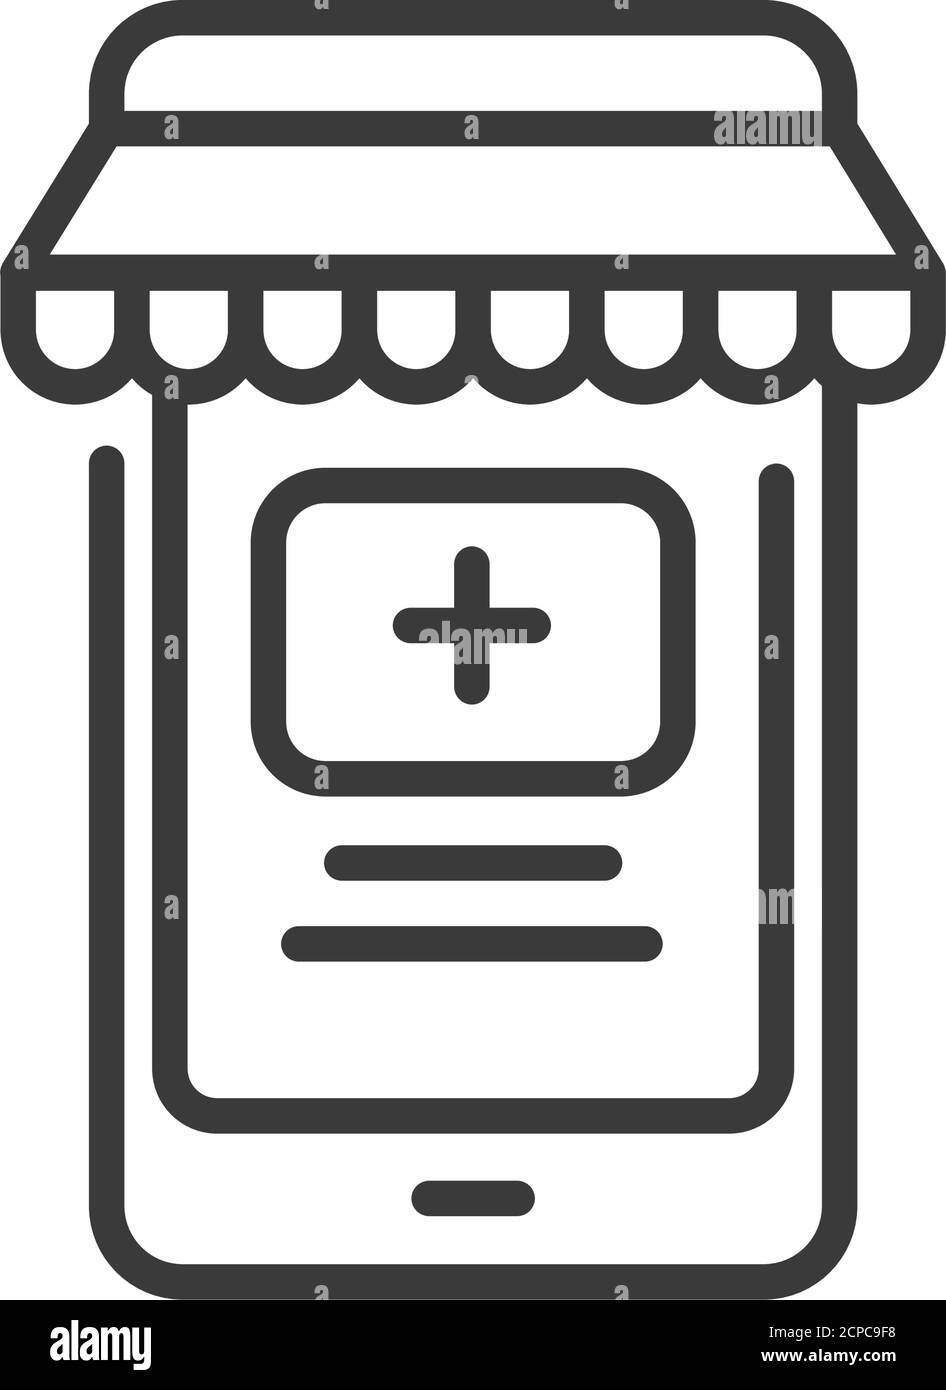 Online drug store in smartphone black icon. Shopping app. Sign for web page, mobile app, banner, social media. Pictogram UI UX user interface. Vector Stock Vector